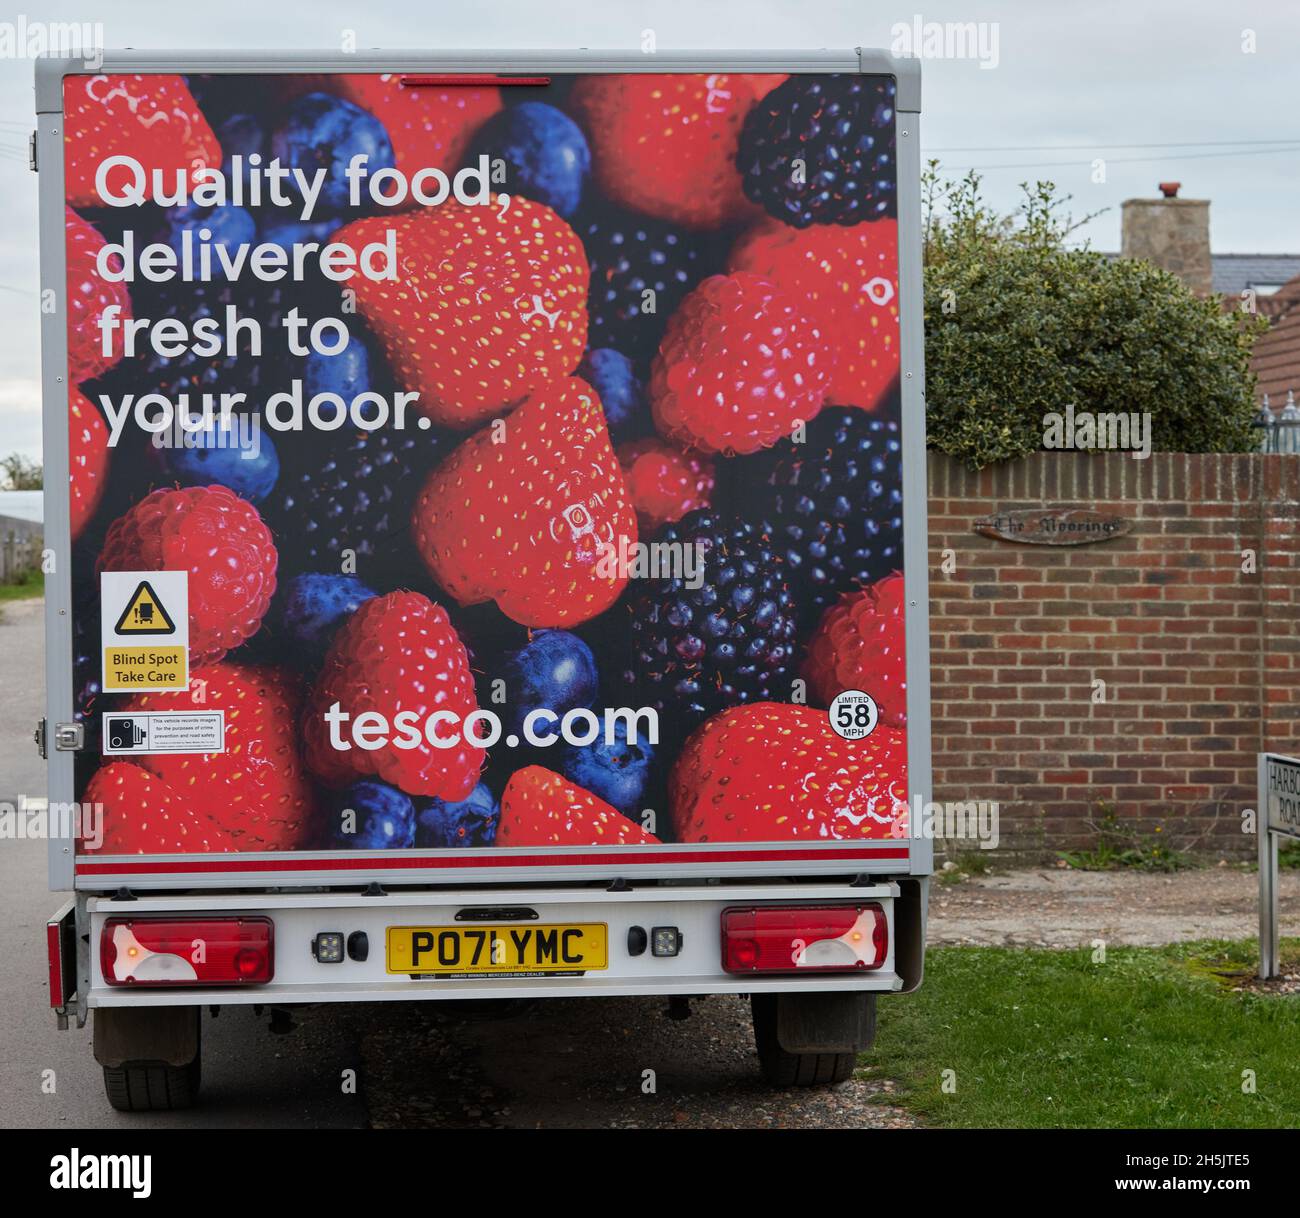 A tesco delivery van seen parked on the side of a road. Stock Photo